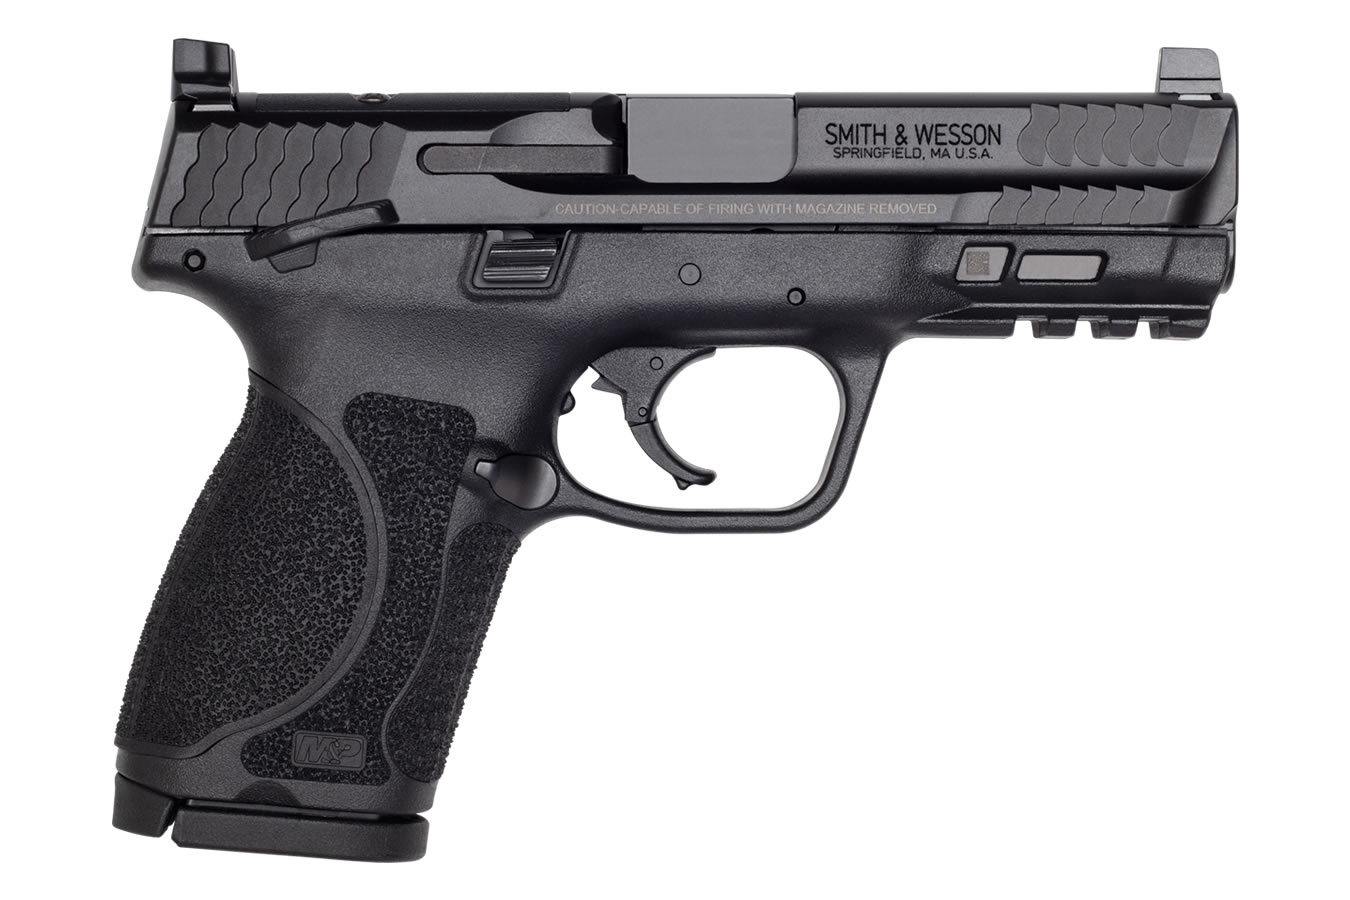 SMITH AND WESSON MP9 M2.0 9MM COMPACT PISTOL OPTIC READY WITH THUMB SAFETY